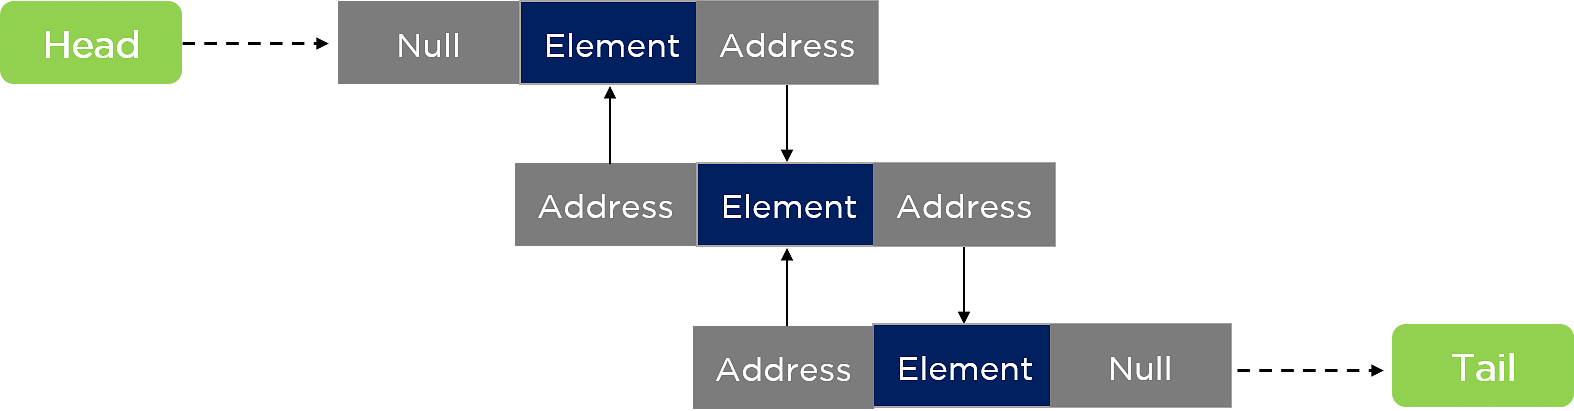 doubly linked list stack java